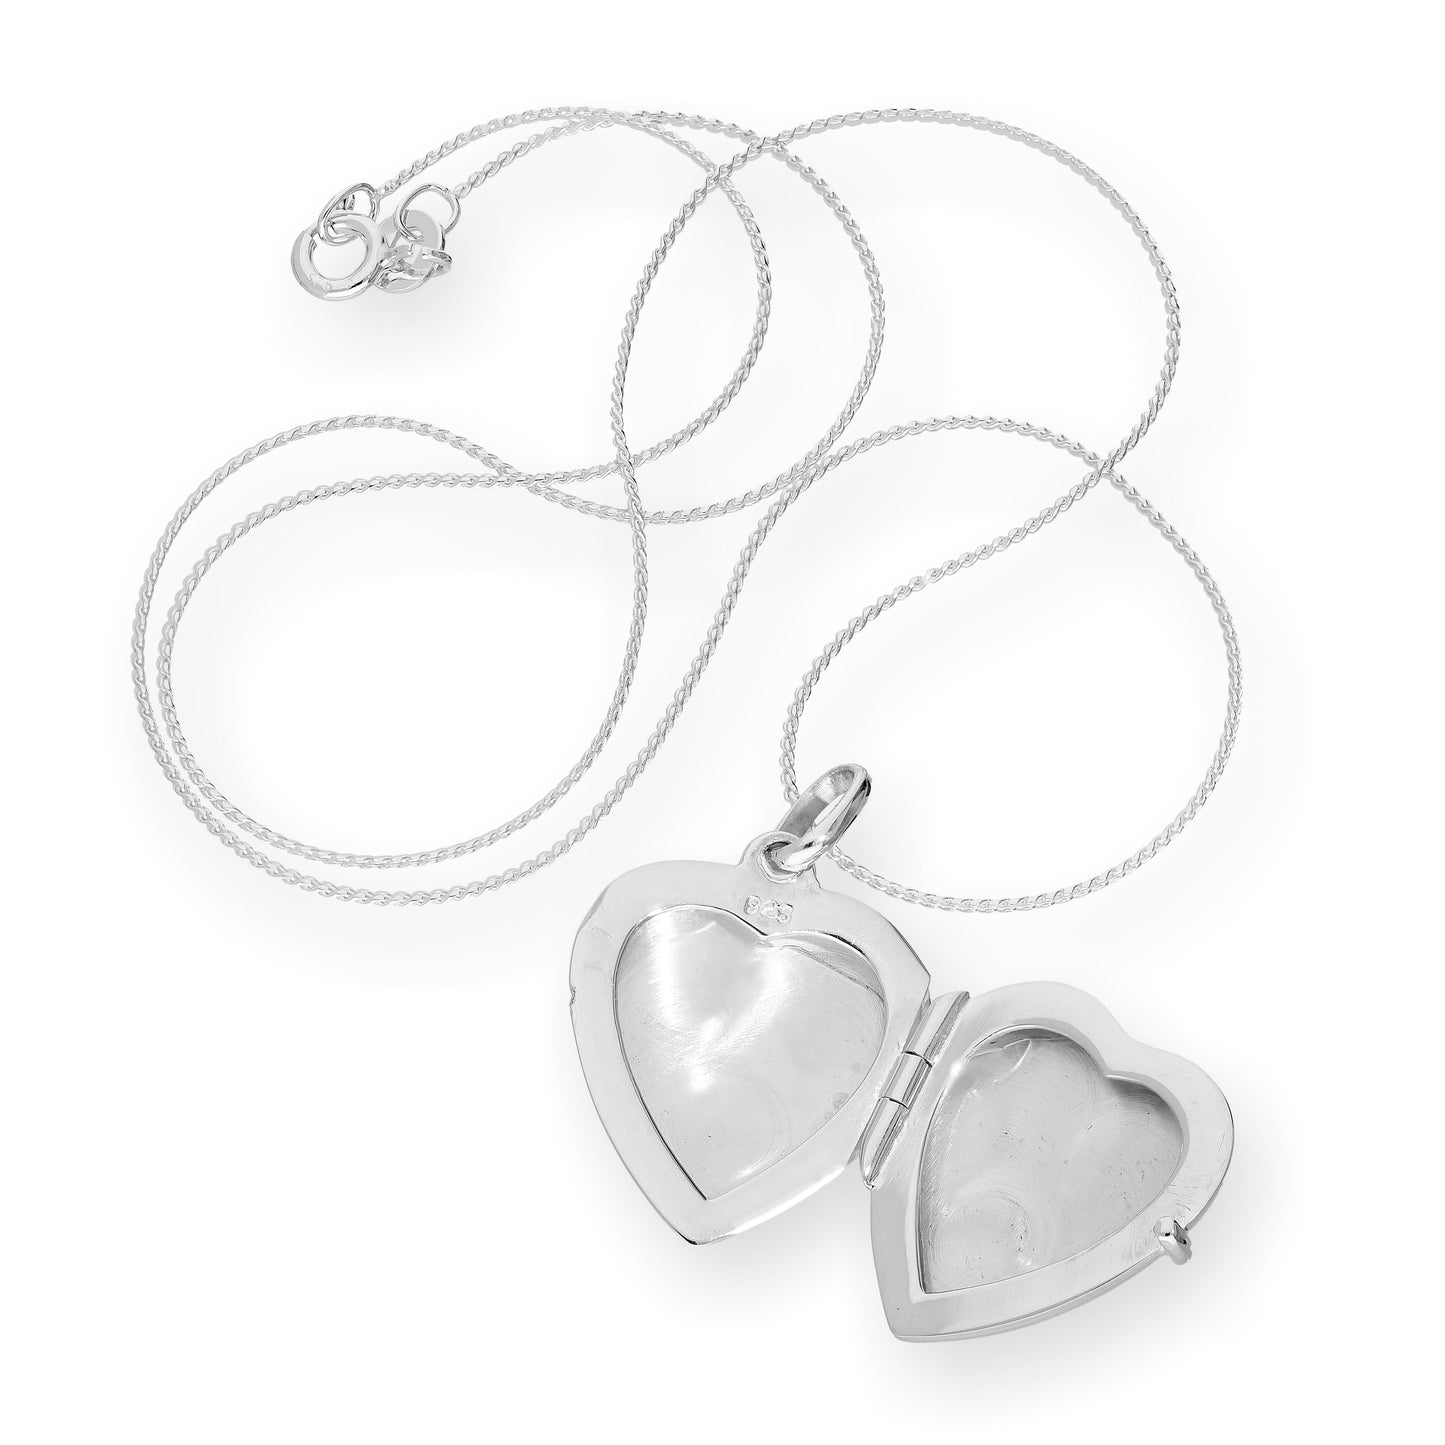 Sterling Silver Engraved Heart Locket on Chain 16 - 22 Inches